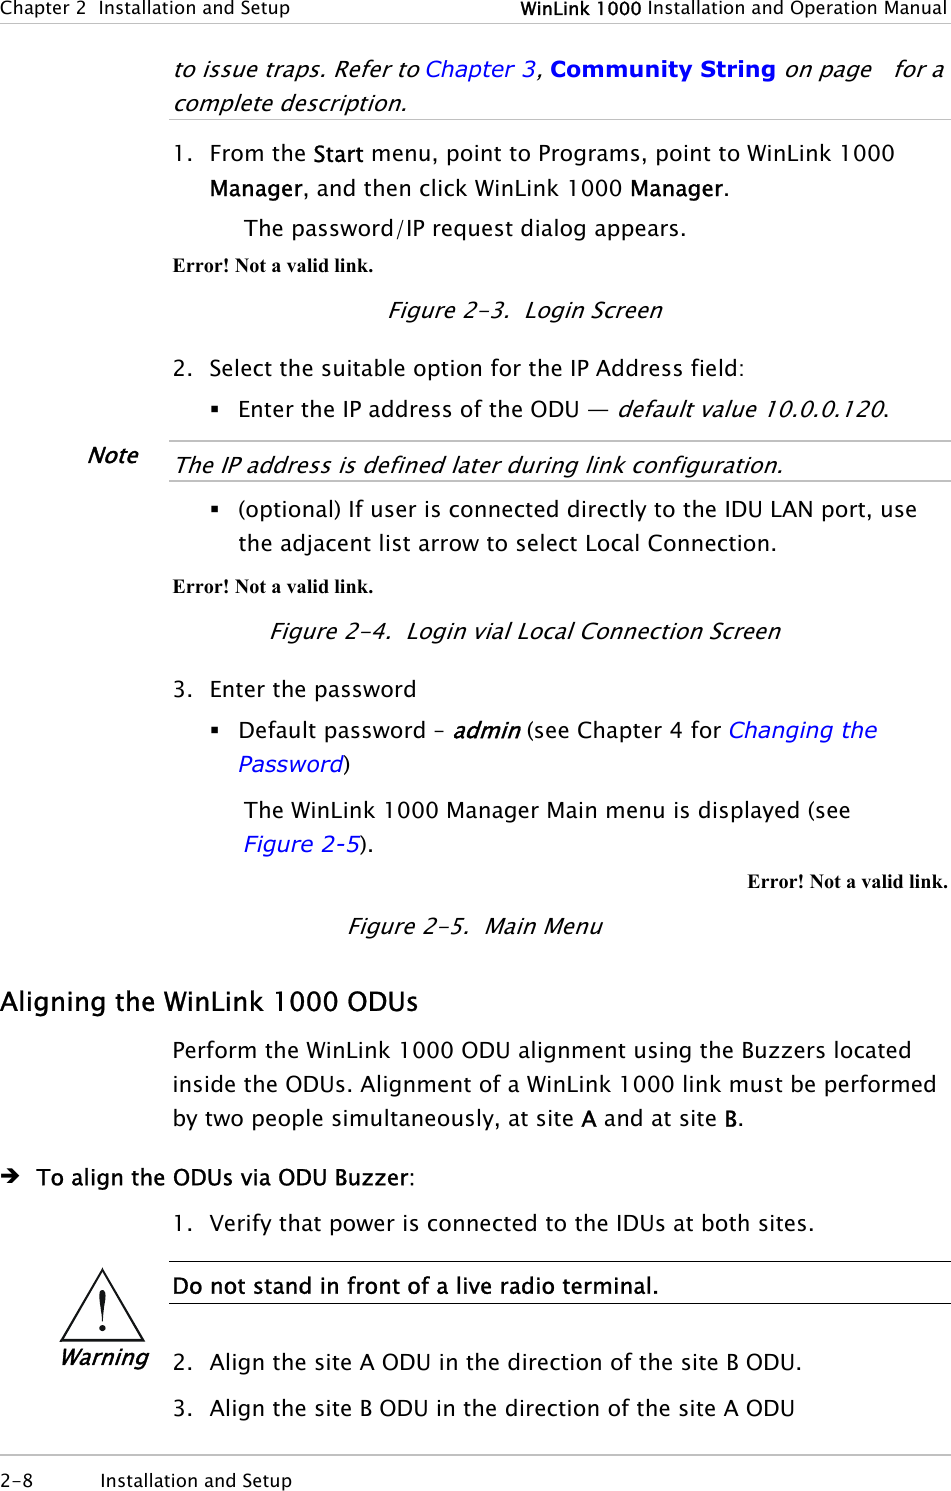 Chapter  2  Installation and Setup  WinLink 1000 Installation and Operation Manual 2-8  Installation and Setup  to issue traps. Refer to Chapter 3, Community String on page   for a complete description.   1. From the Start menu, point to Programs, point to WinLink 1000 Manager, and then click WinLink 1000 Manager. The password/IP request dialog appears. Error! Not a valid link. Figure  2-3.  Login Screen 2. Select the suitable option for the IP Address field:  Enter the IP address of the ODU — default value 10.0.0.120.  The IP address is defined later during link configuration.   (optional) If user is connected directly to the IDU LAN port, use the adjacent list arrow to select Local Connection. Error! Not a valid link. Figure  2-4.  Login vial Local Connection Screen 3. Enter the password  Default password – admin (see Chapter 4 for Changing the Password) The WinLink 1000 Manager Main menu is displayed (see Figure  2-5). Error! Not a valid link. Figure  2-5.  Main Menu Aligning the WinLink 1000 ODUs Perform the WinLink 1000 ODU alignment using the Buzzers located inside the ODUs. Alignment of a WinLink 1000 link must be performed by two people simultaneously, at site A and at site B. Î To align the ODUs via ODU Buzzer: 1. Verify that power is connected to the IDUs at both sites.  Do not stand in front of a live radio terminal.  2. Align the site A ODU in the direction of the site B ODU. 3. Align the site B ODU in the direction of the site A ODU Warning Note 